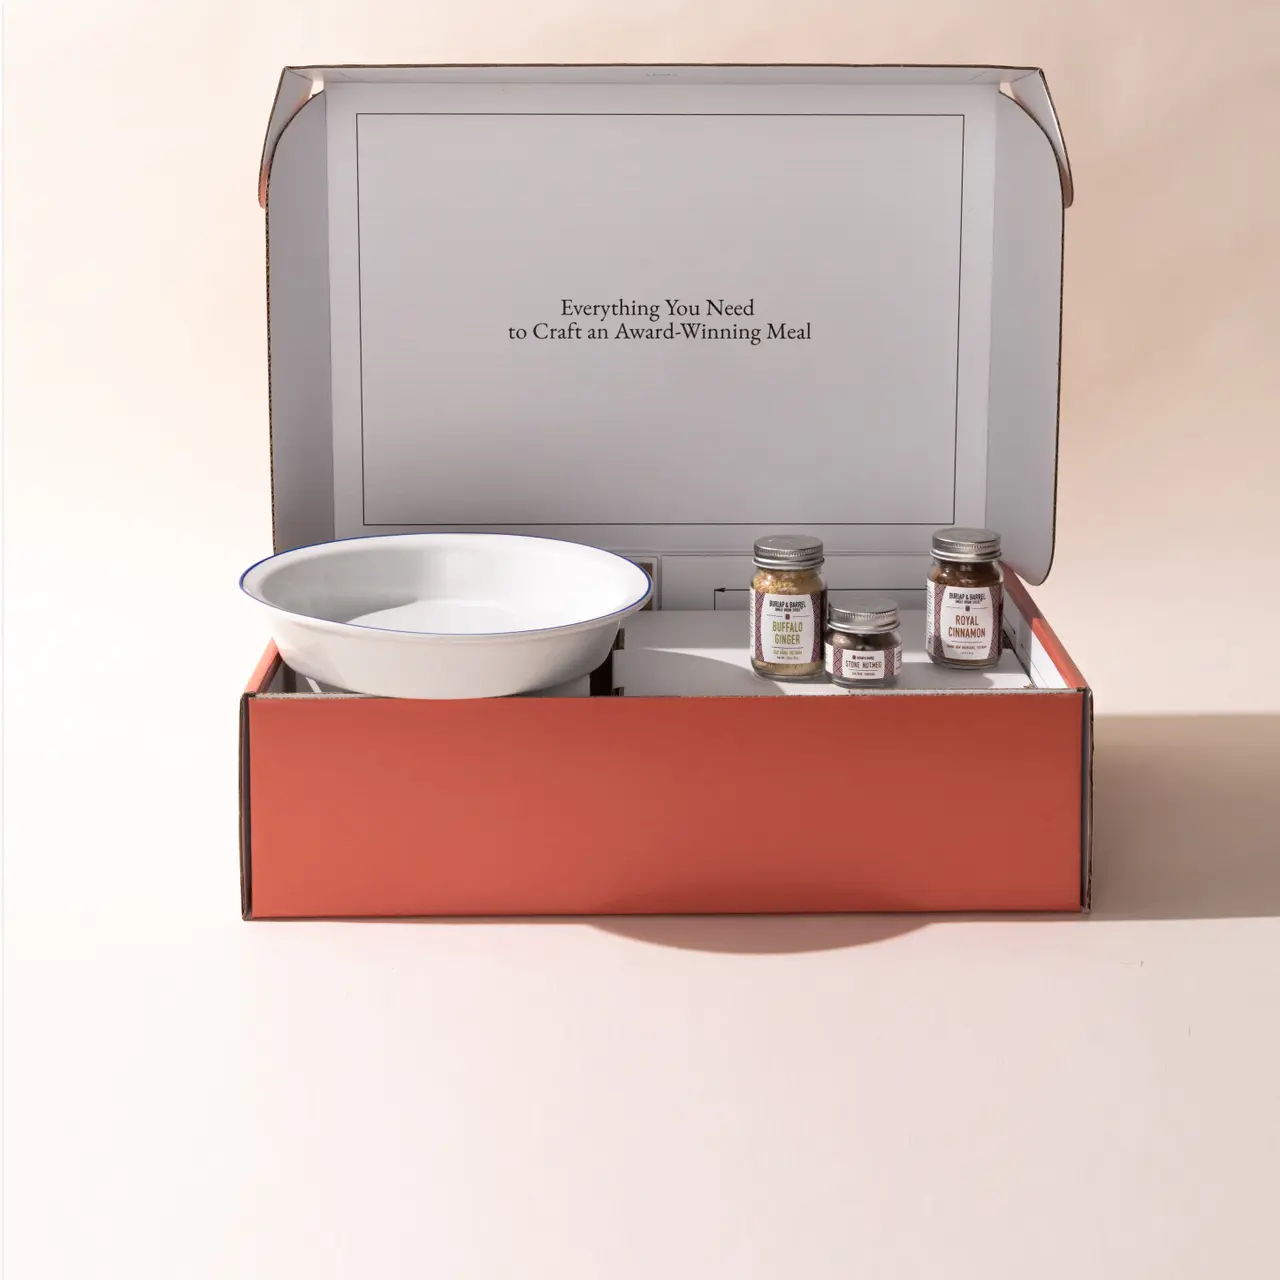 An open meal kit box containing a bowl and spice jars, with the text "Everything You Need to Craft an Award-Winning Meal" inside the lid.